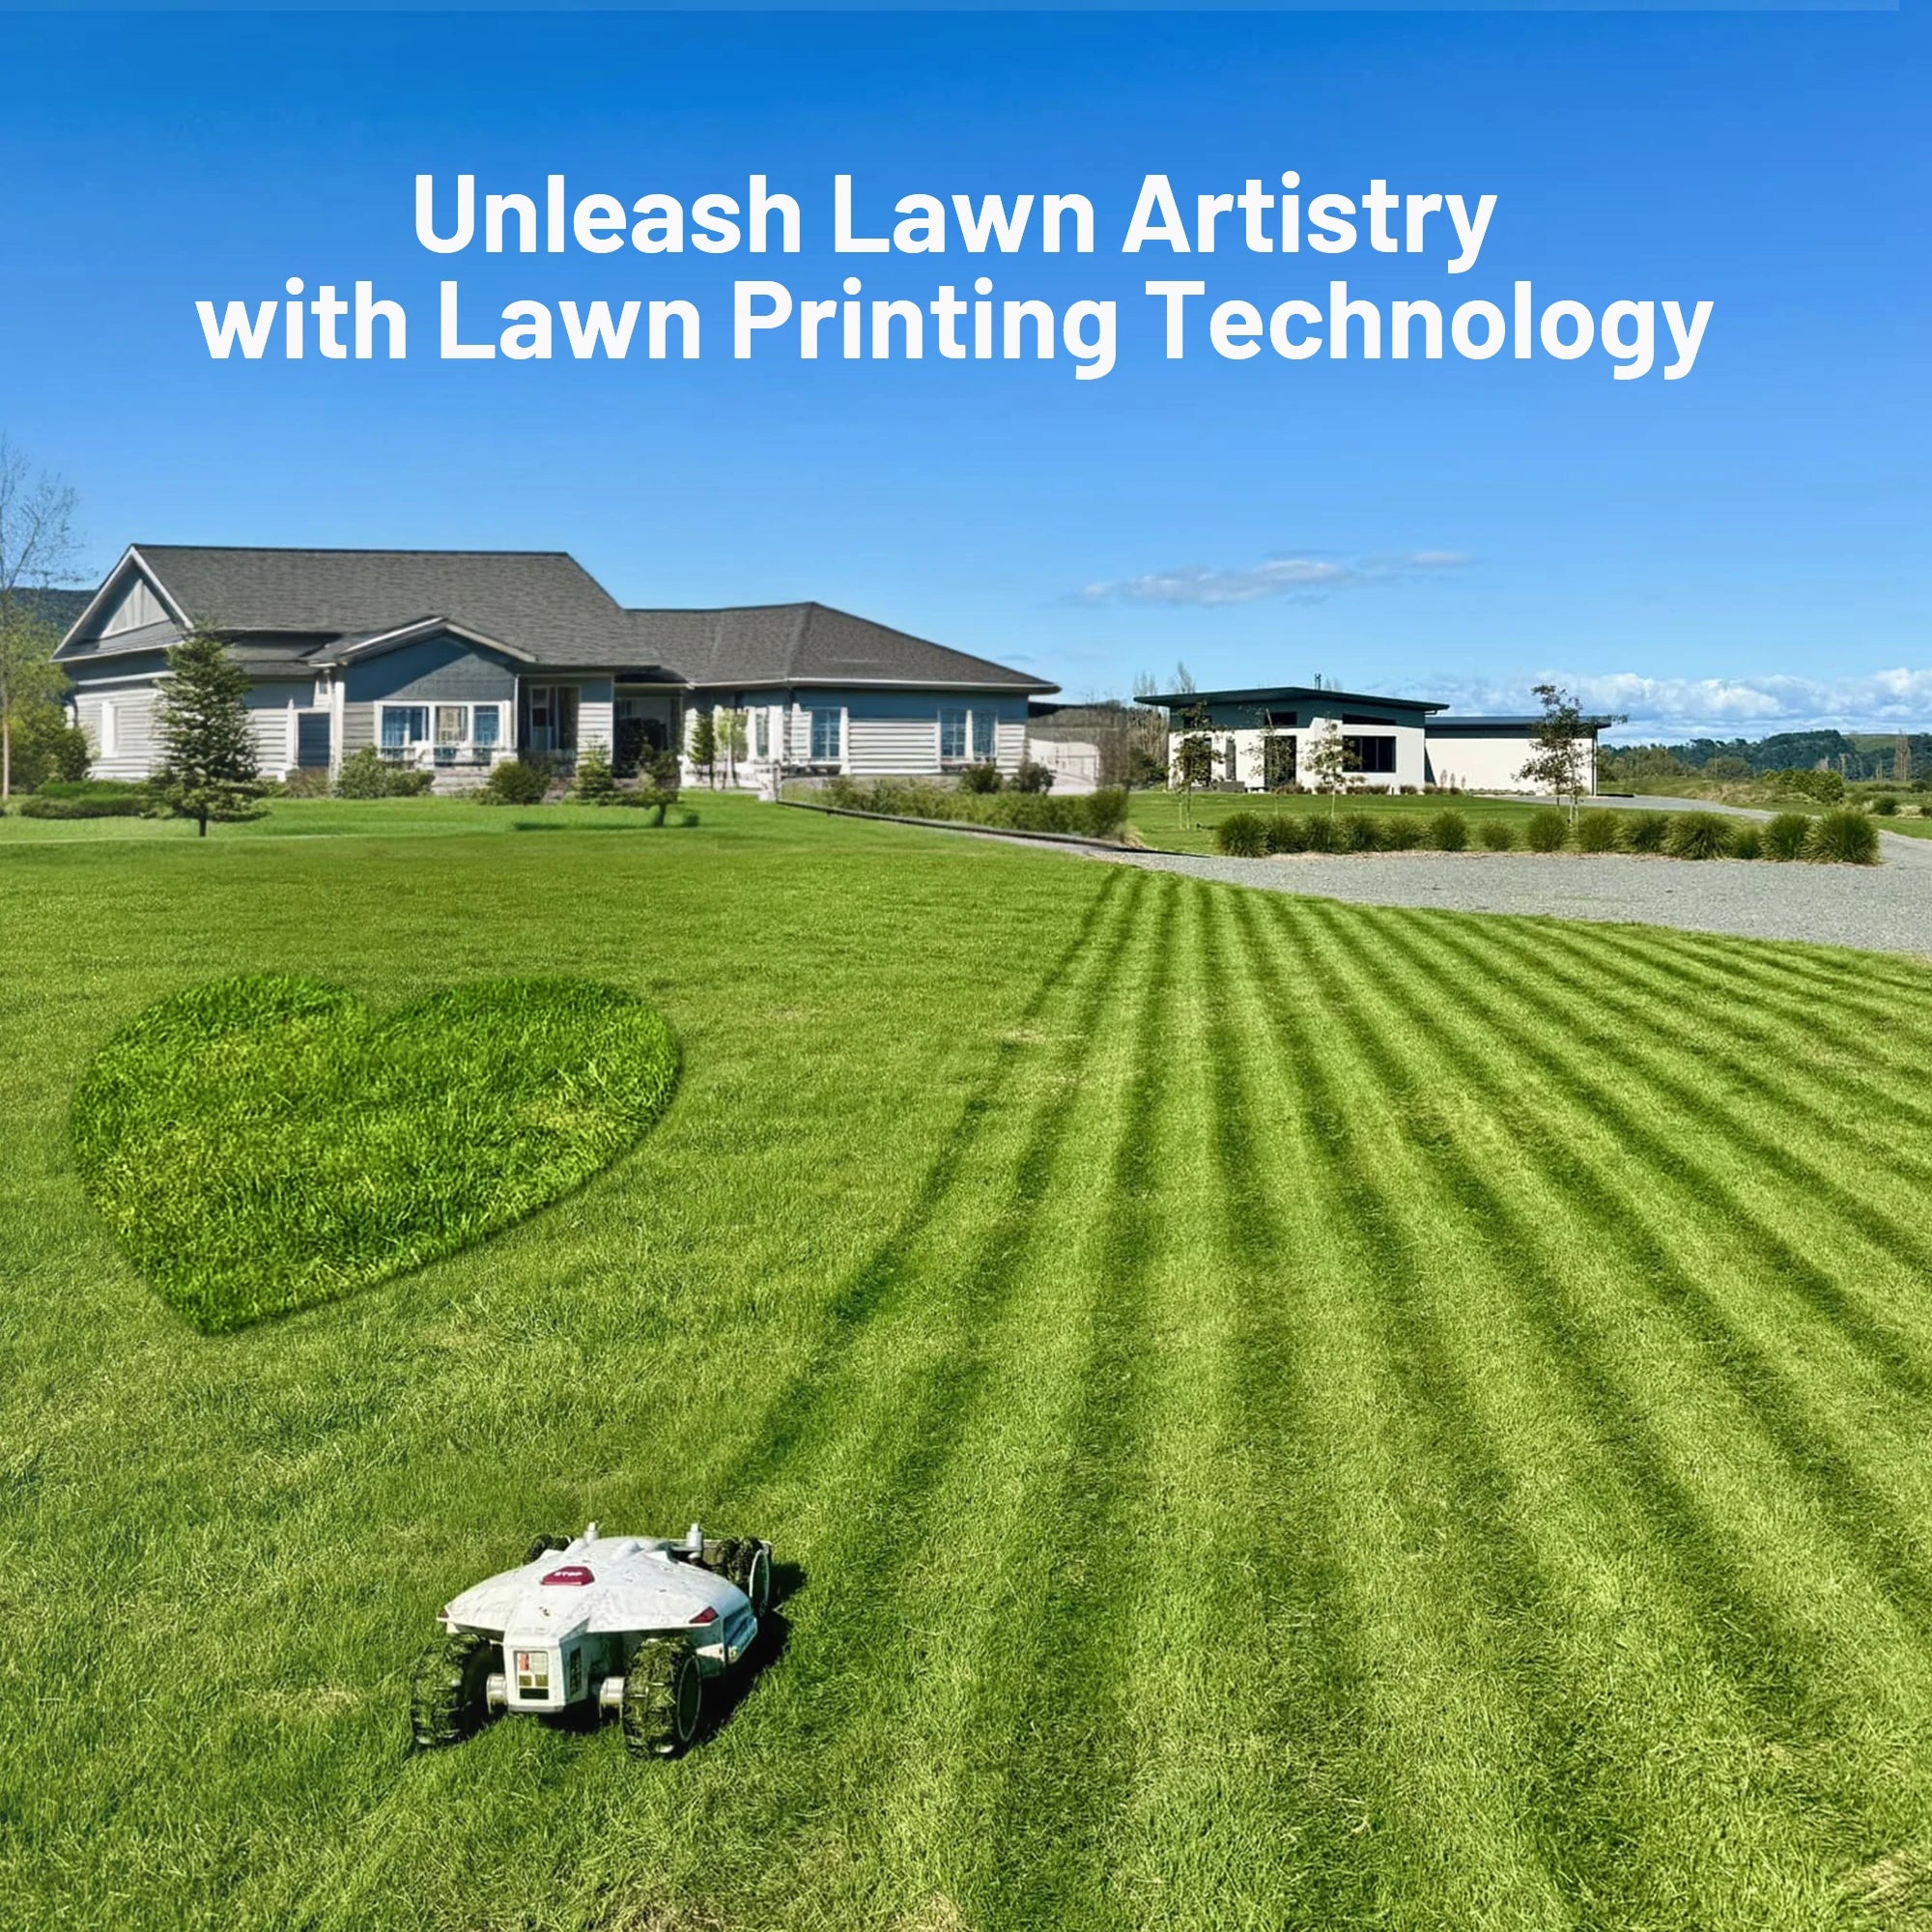 LUBA 2 robot lawn mower - Unleash Lawn Artistry with Lawn Printing Technology